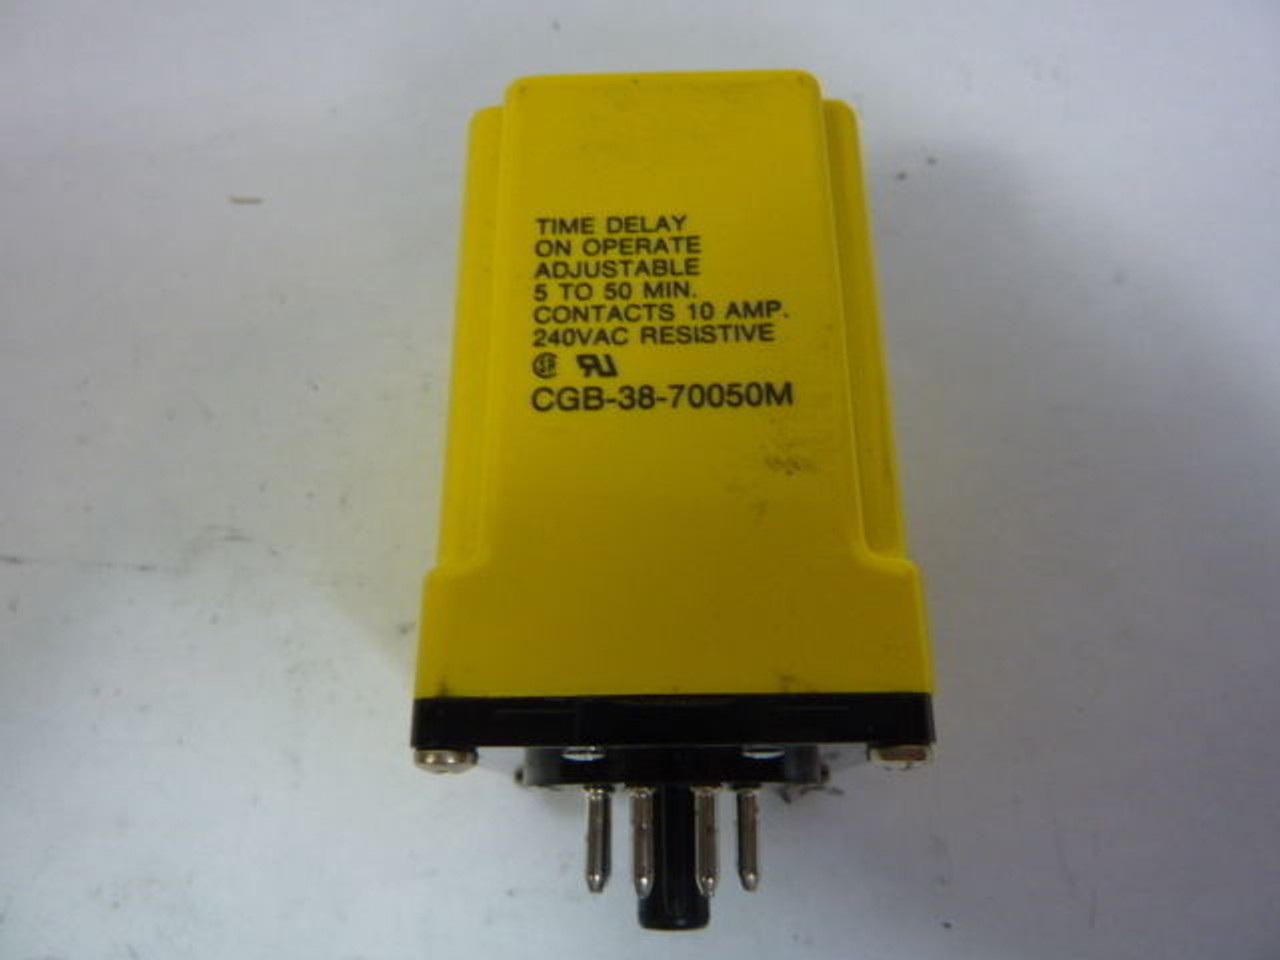 Potter & Brumfield CGB-38-70050M Time Delay Relay 120VAC 5-50Min 10A USED